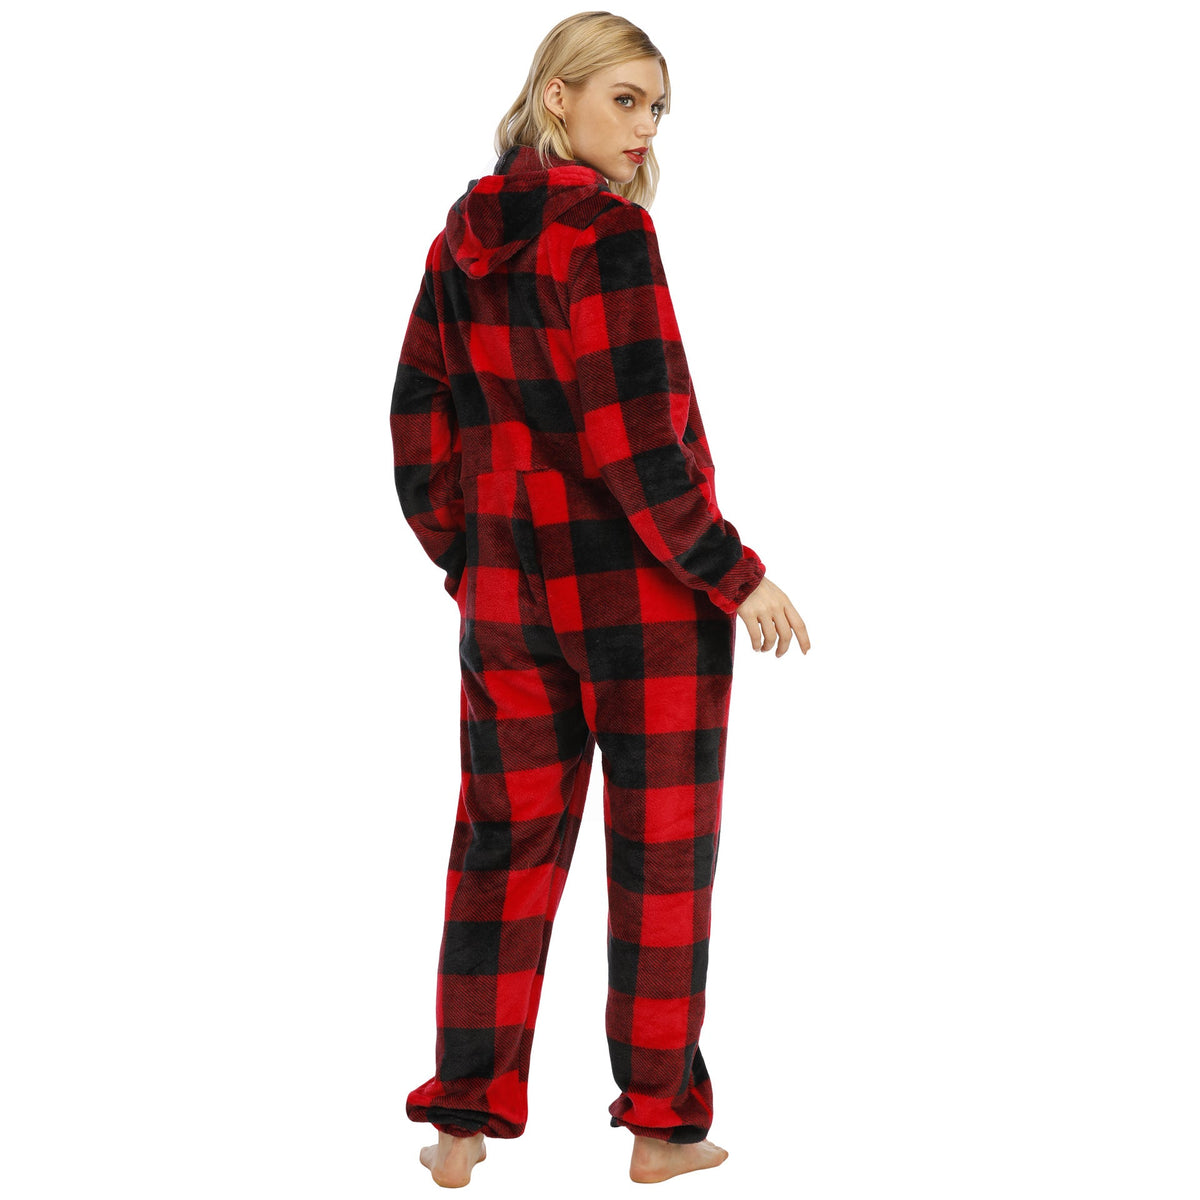 Women's Christmas Hooded Onesie One-Piece Pajamas with Poms Red Plaid